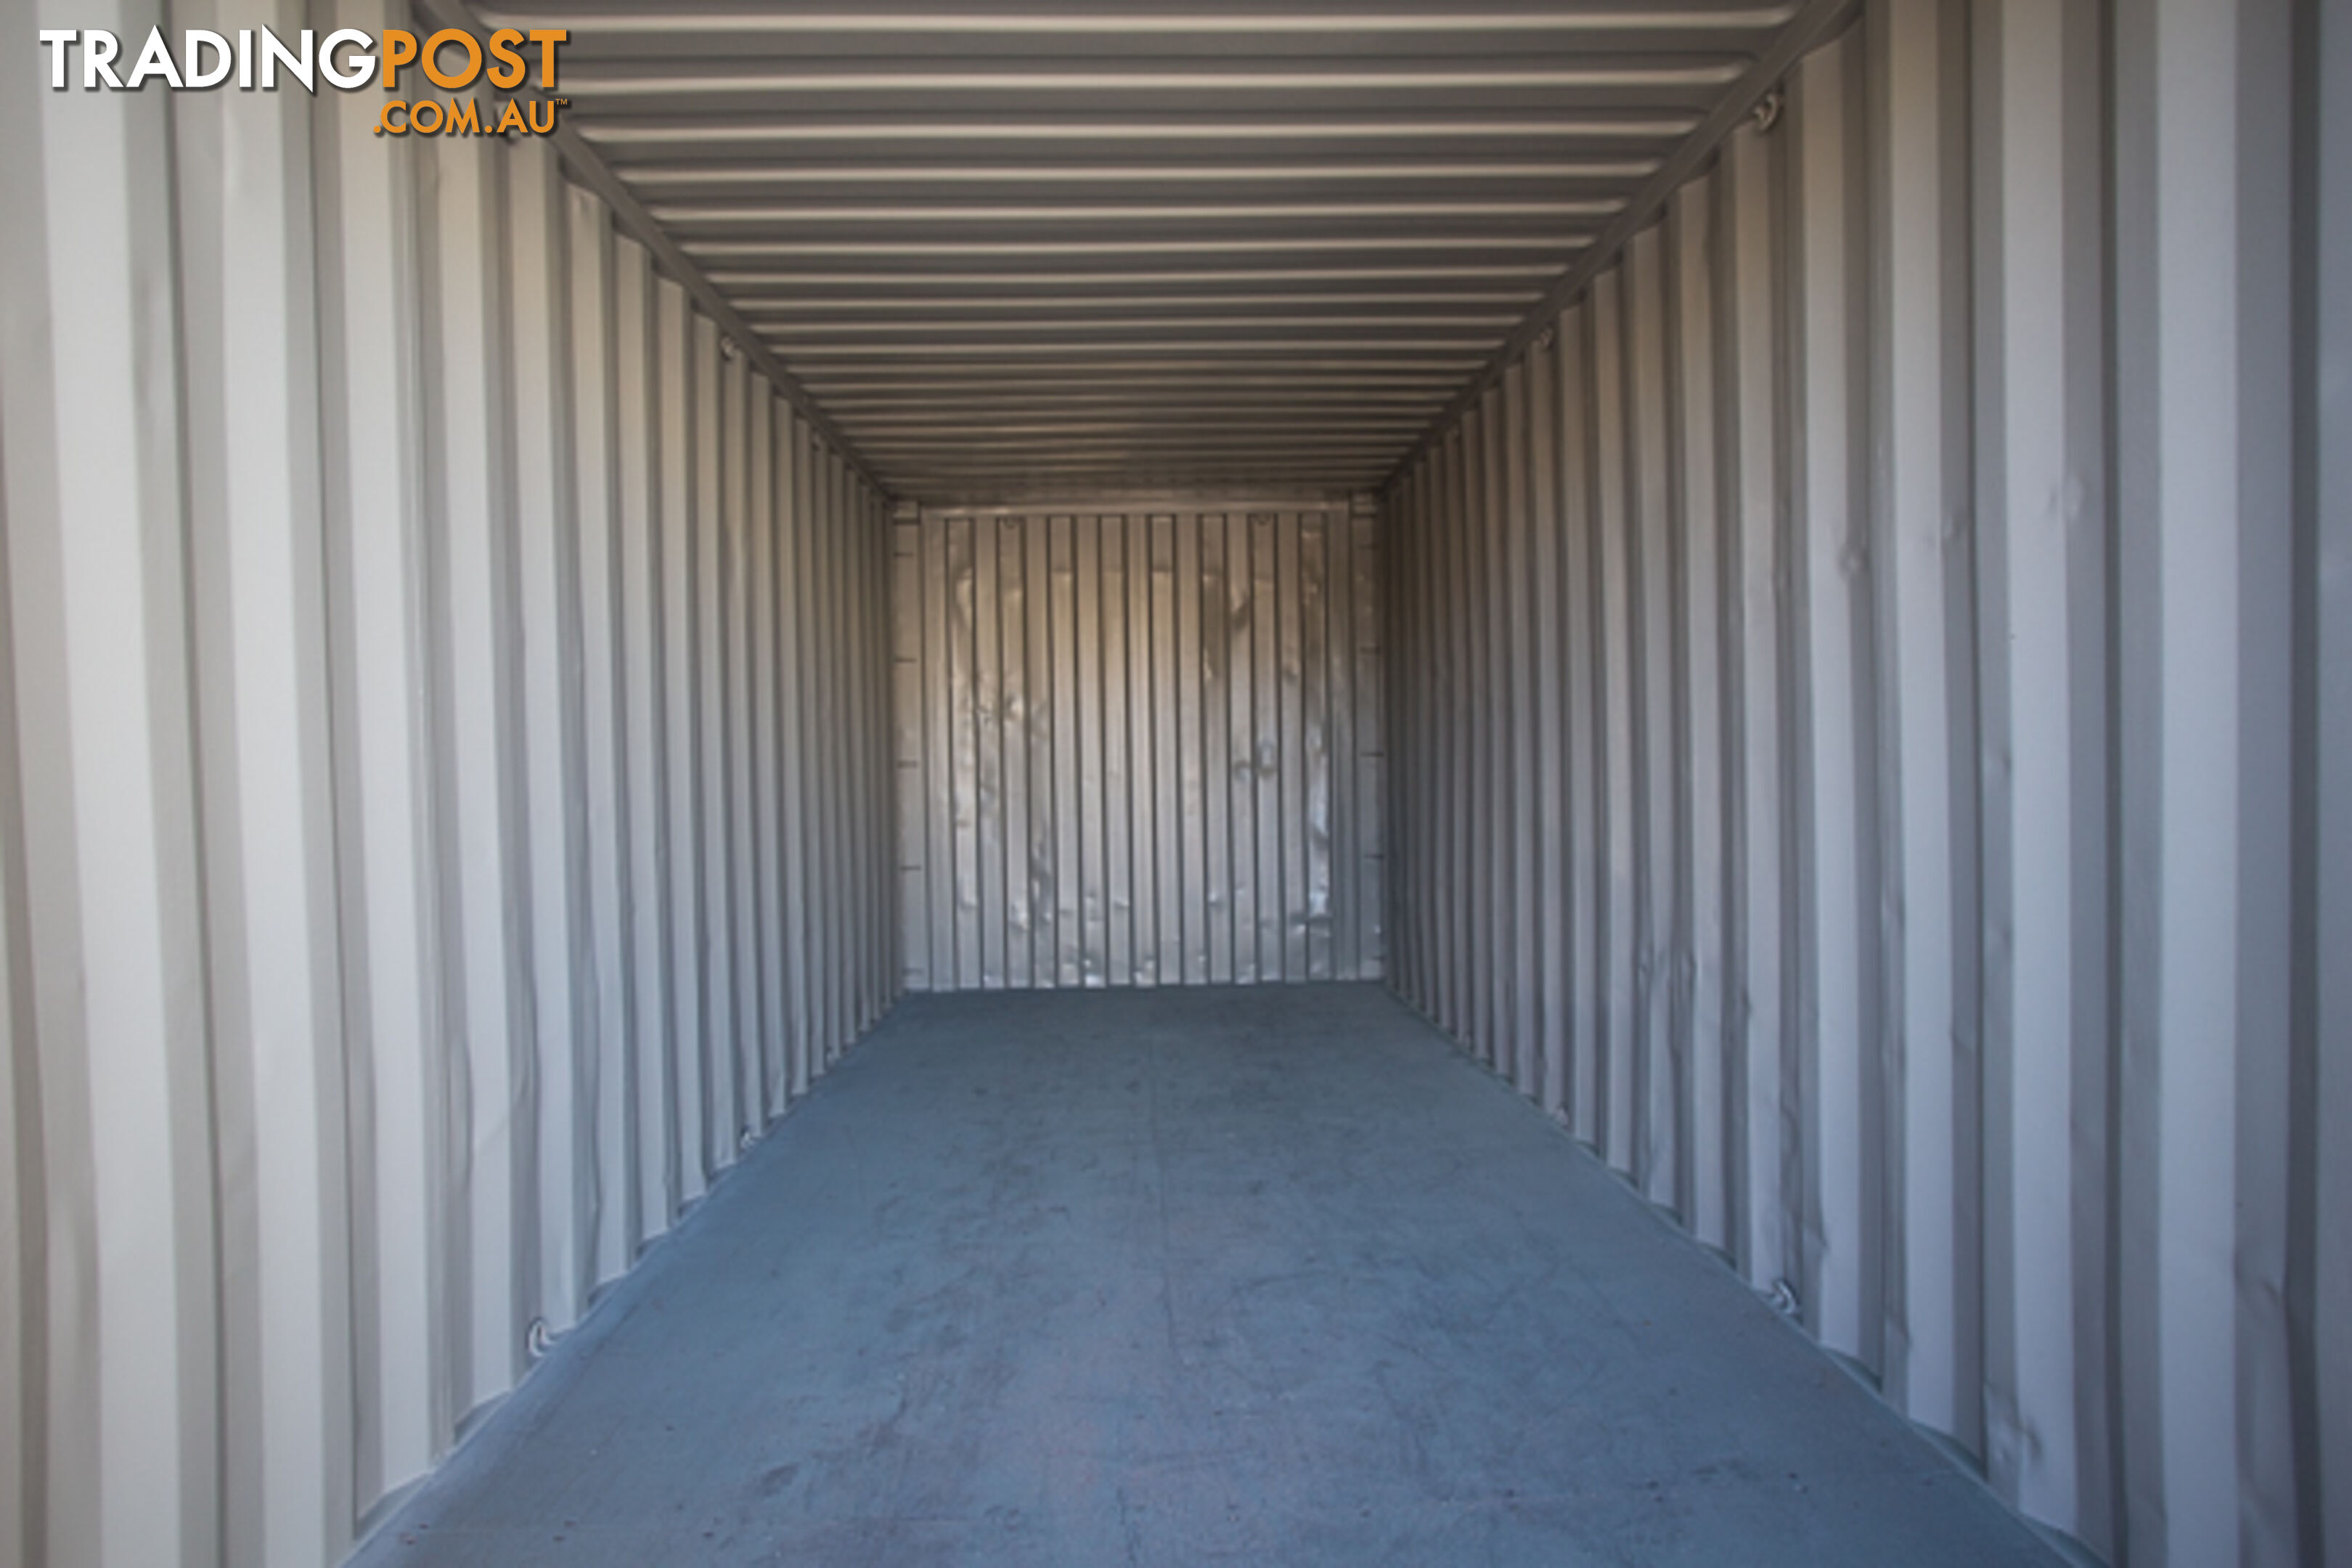 Refurbished Painted 20ft Shipping Containers Goolwa - From $4500 + GST